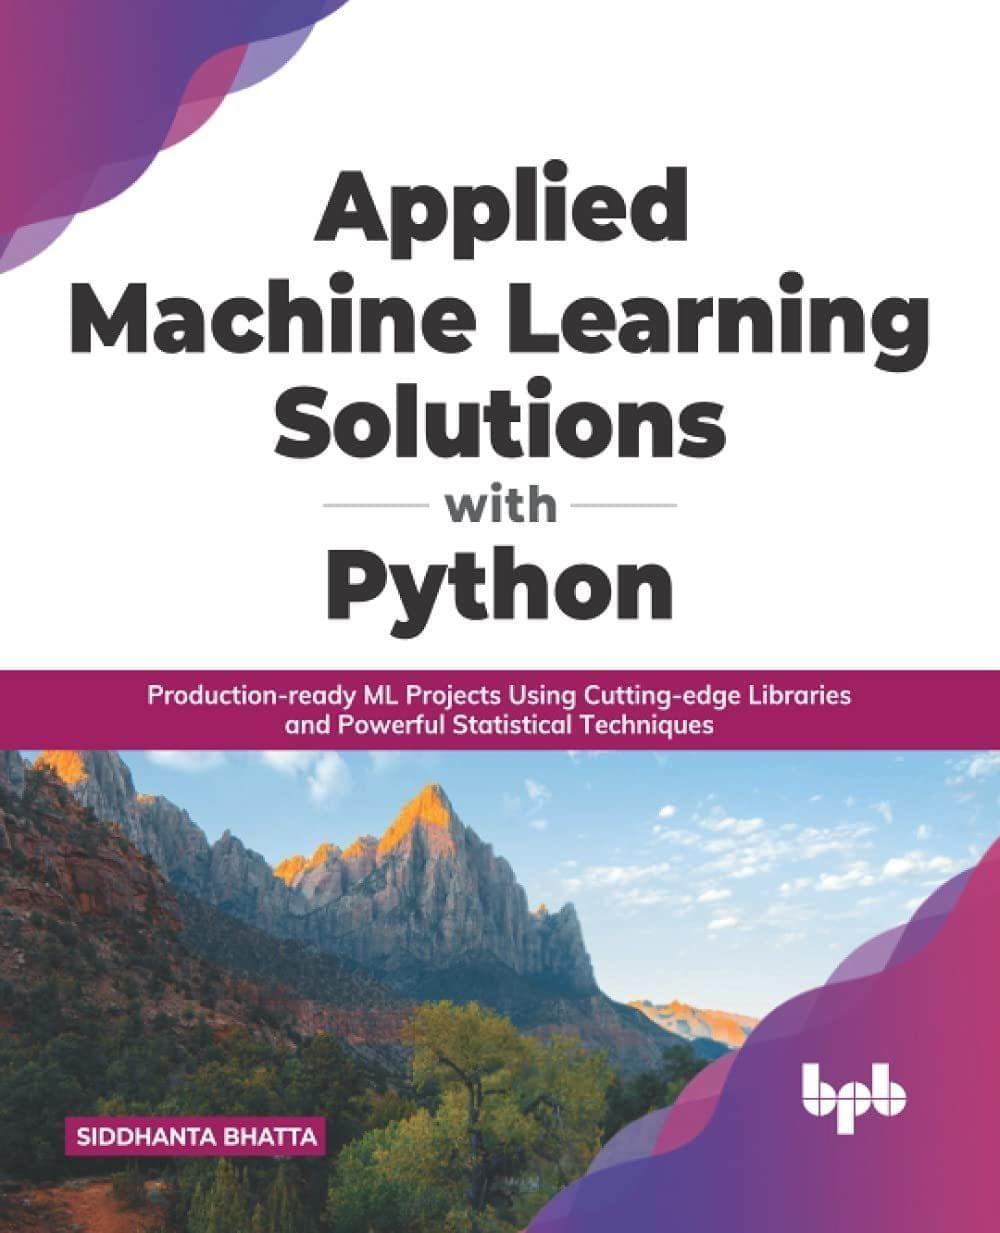 Applied Machine Learning Solutions with Python [Paperback] Bhatta, Siddhanta